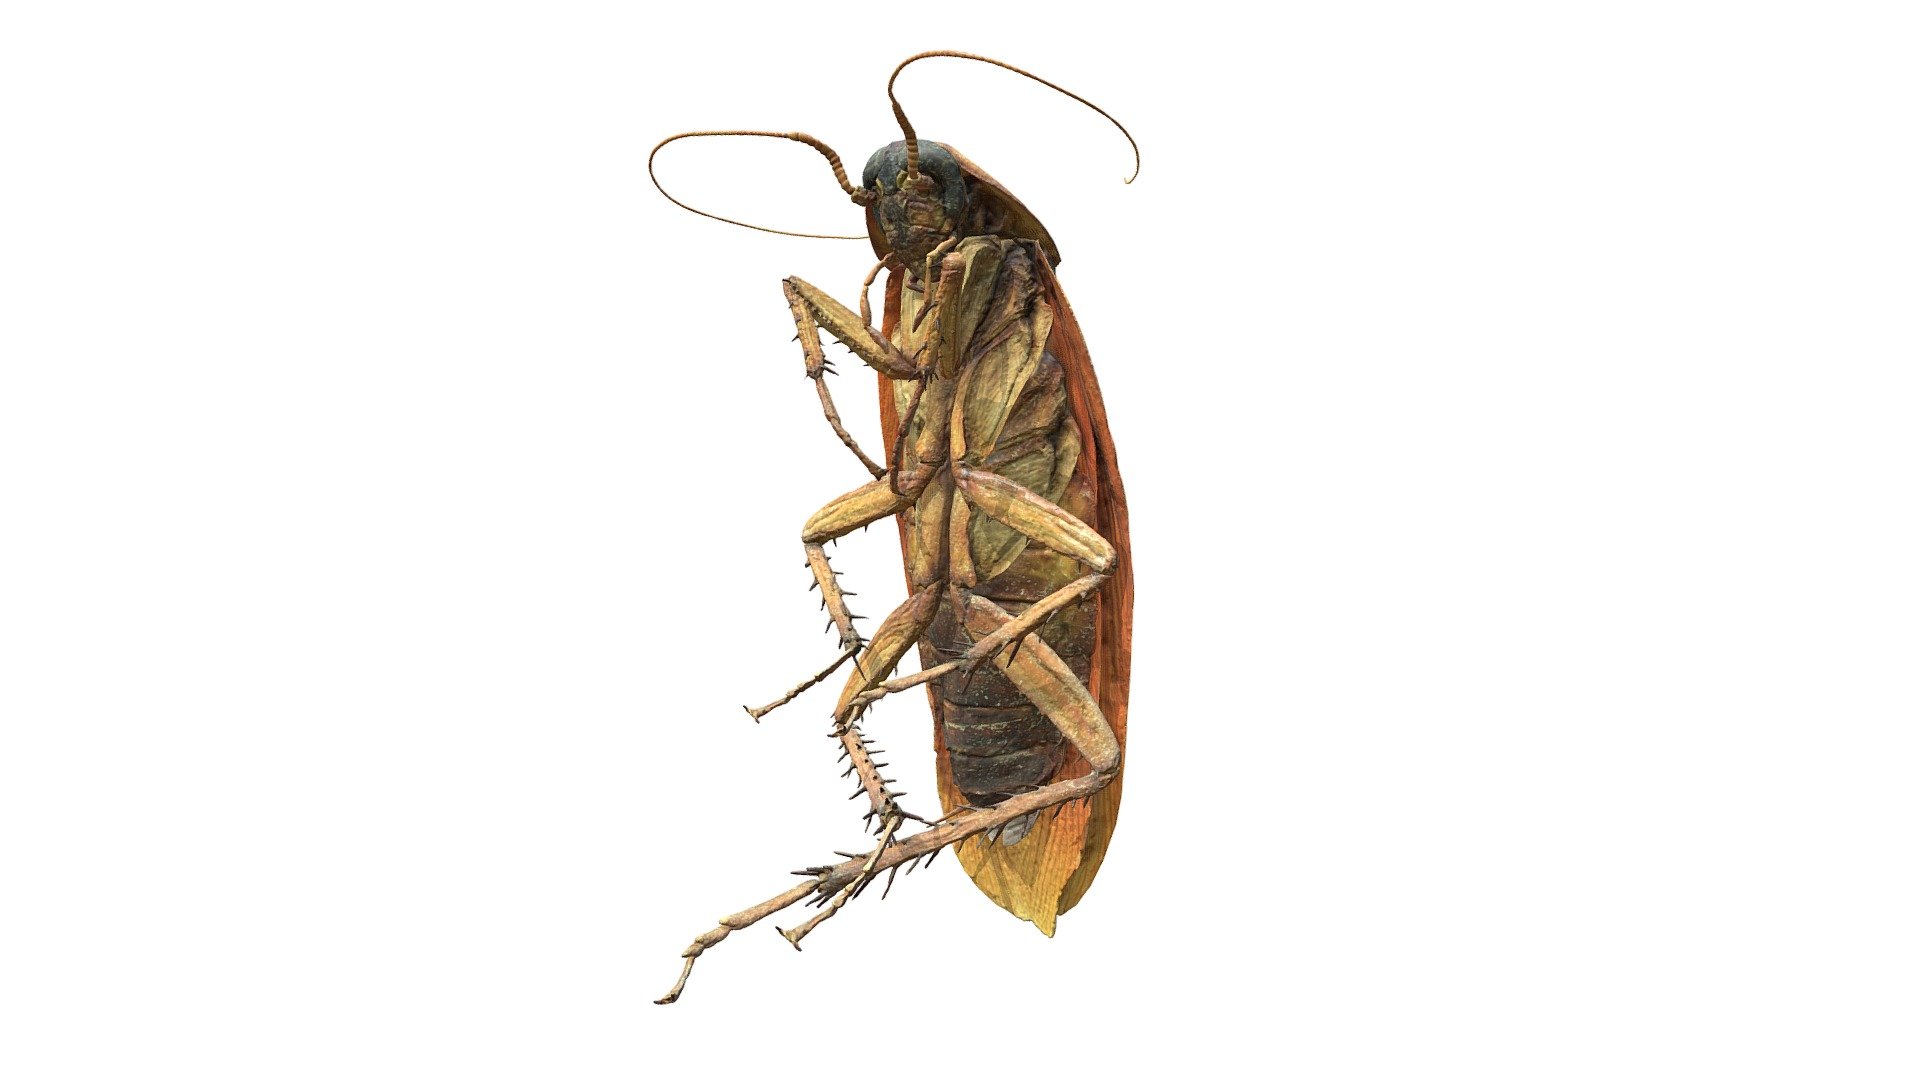 This is a 3D scan of a cockroach I bought on etsy. It's part of a larger project where I combined 3D modeled assets with photogrammetry (see http://whatswrongwithwhite.tumblr.com/image/177884973392 ). I used a lot of custom photo equipment (macro lens, polarization filters, extension tubes and a 3D printed cockroach holder from shapeways). For cleanup I used blender (cleaning up holes, chopping up into body parts, modeling deatils). For the final material design and export Substance Painter did a great job.

Making Of:
http://whatswrongwithwhite.tumblr.com/playroach

full scene:
https://skfb.ly/6BPQU

Used in this NYT article:
https://www.nytimes.com/interactive/2018/10/25/multimedia/bugs-halloween-kids-ar-ul.html - Cockroach (3D photogrammetry scan) - Download Free 3D model by Kathrin&Christian (@extracrispi) 3d model